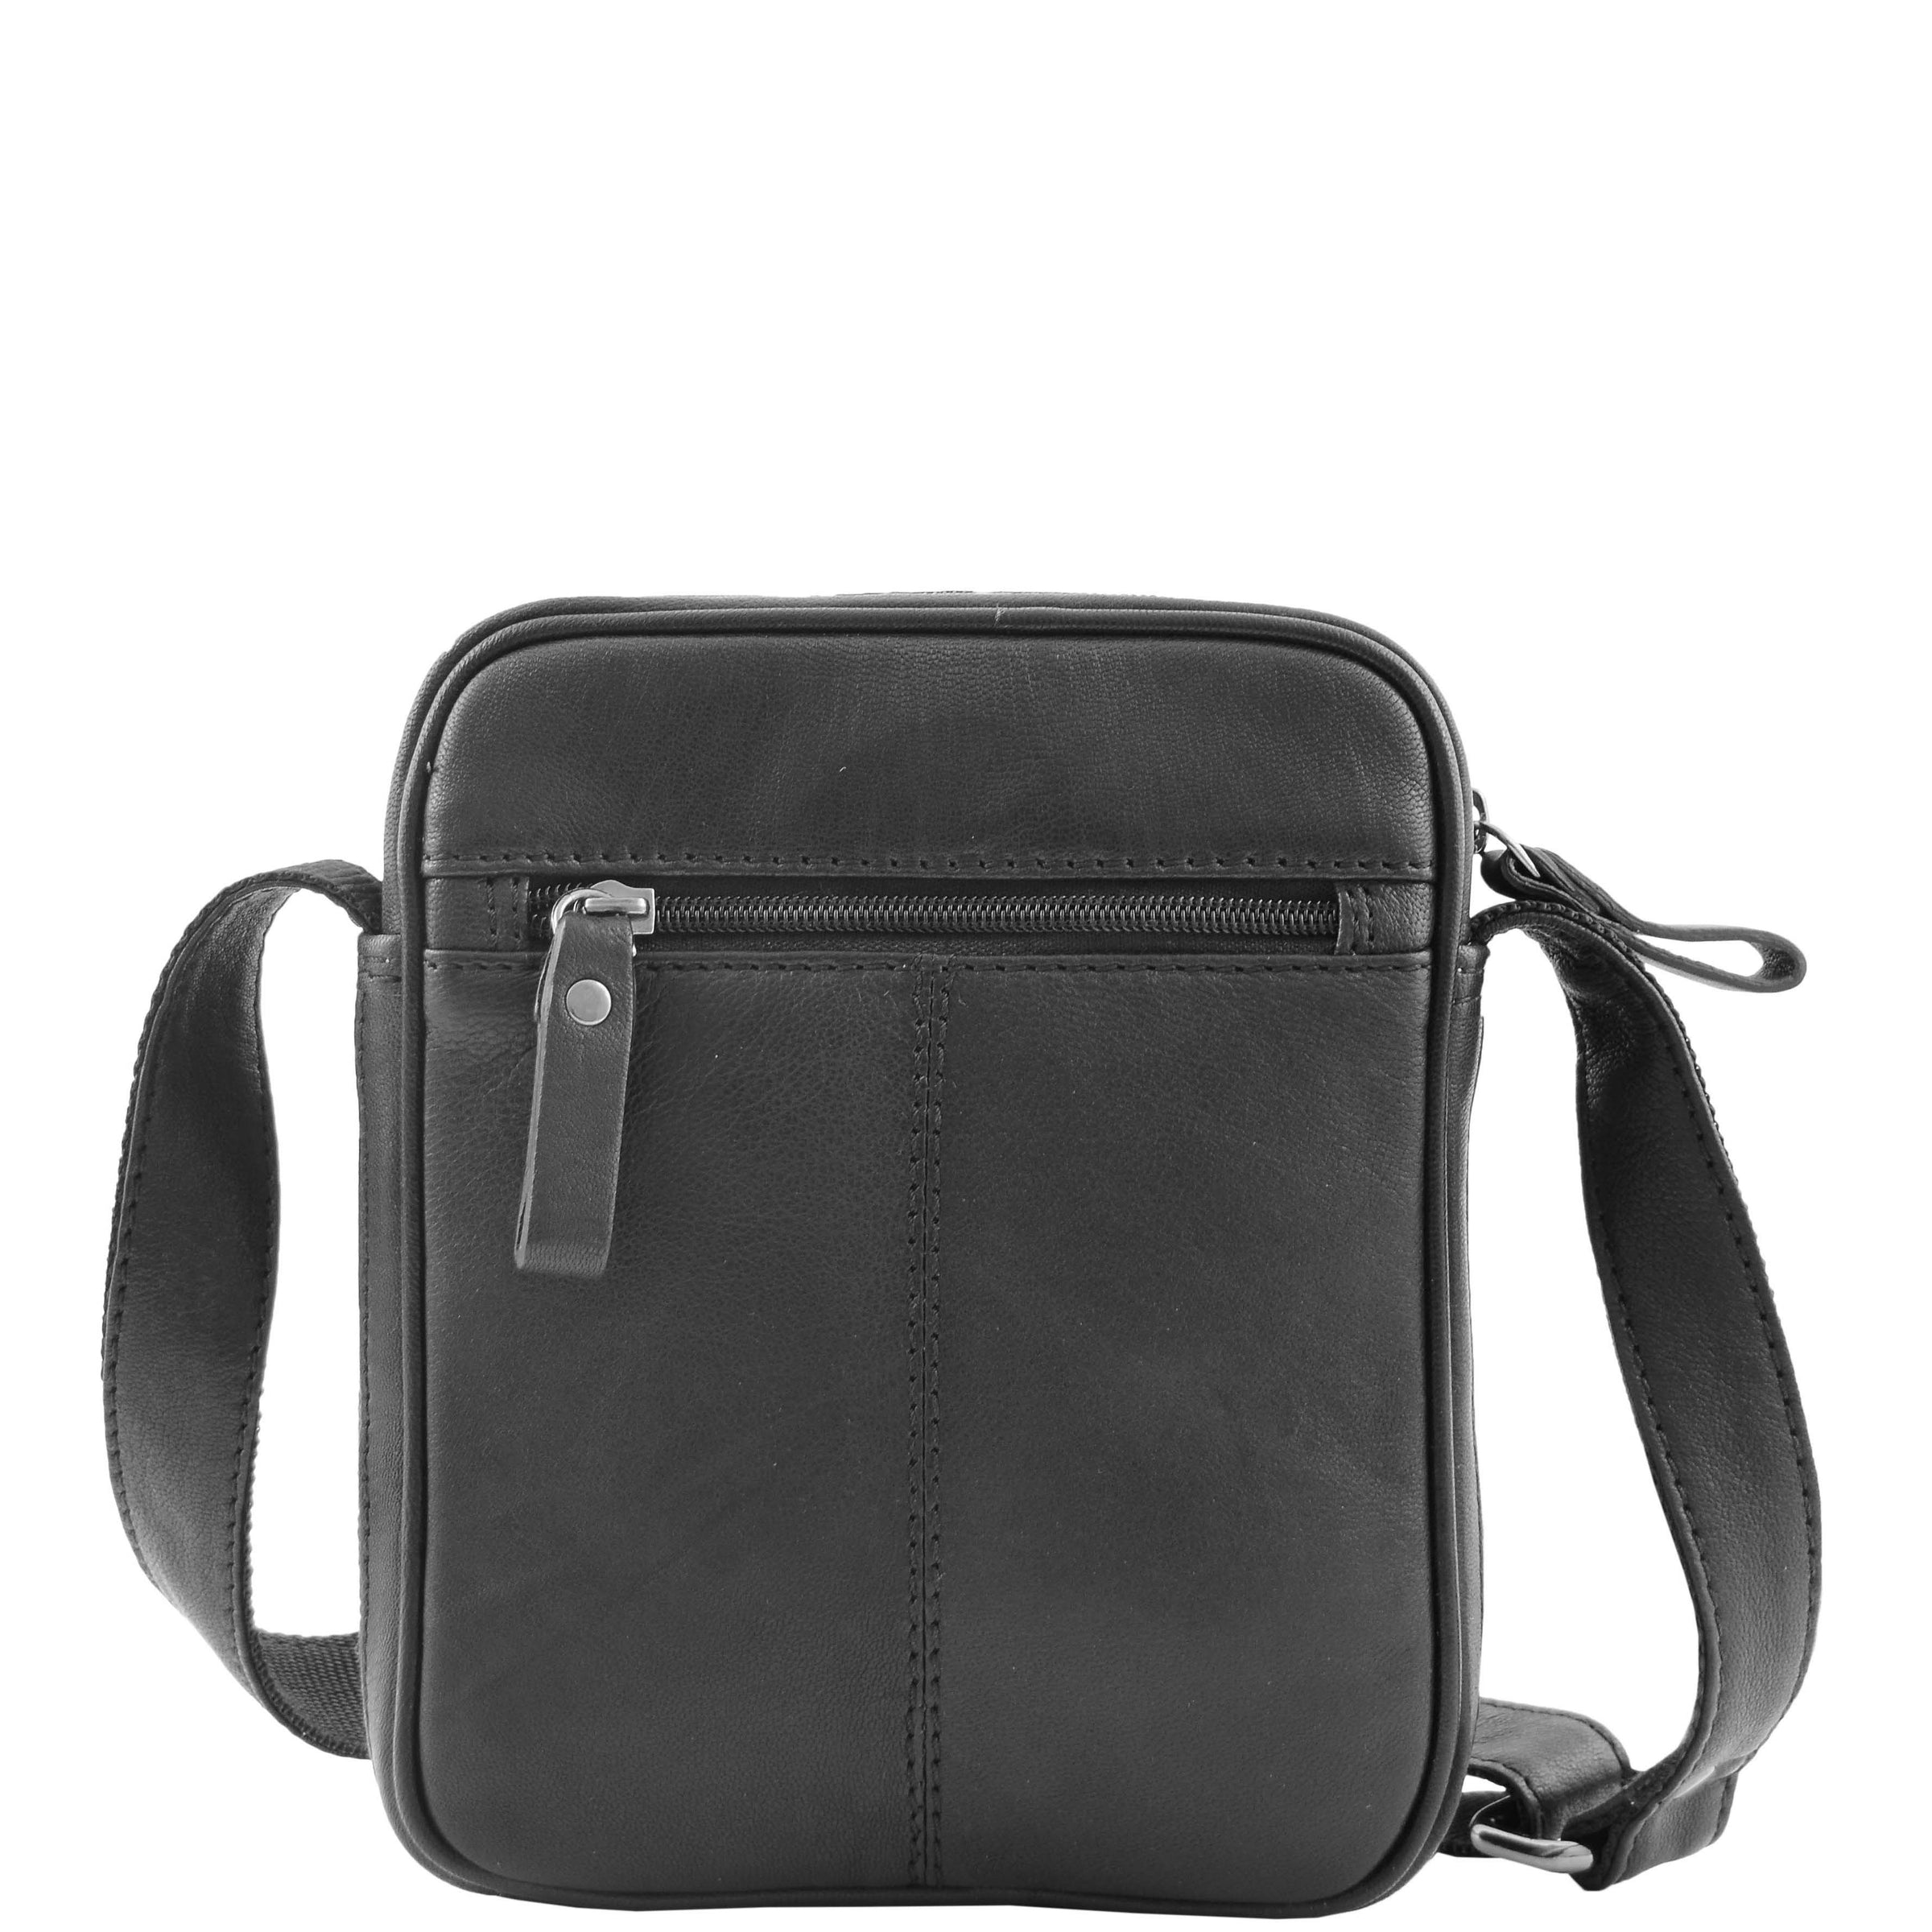 Mens Leather Cross Body Small Flight Bag Parkham Black - House of Leather